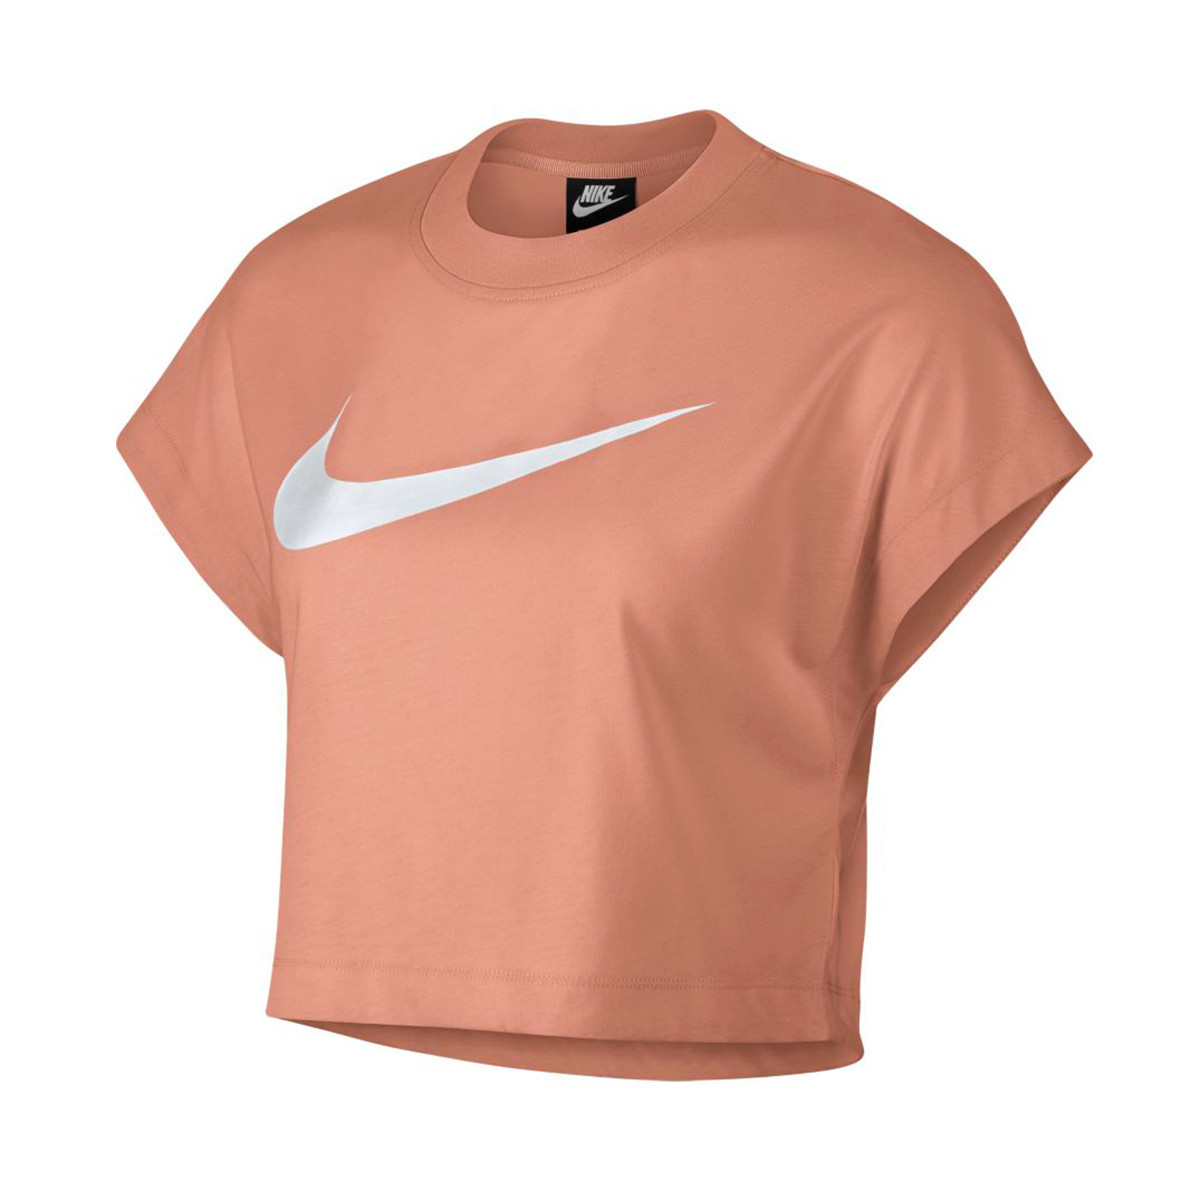 camisetas nike mujer outlet